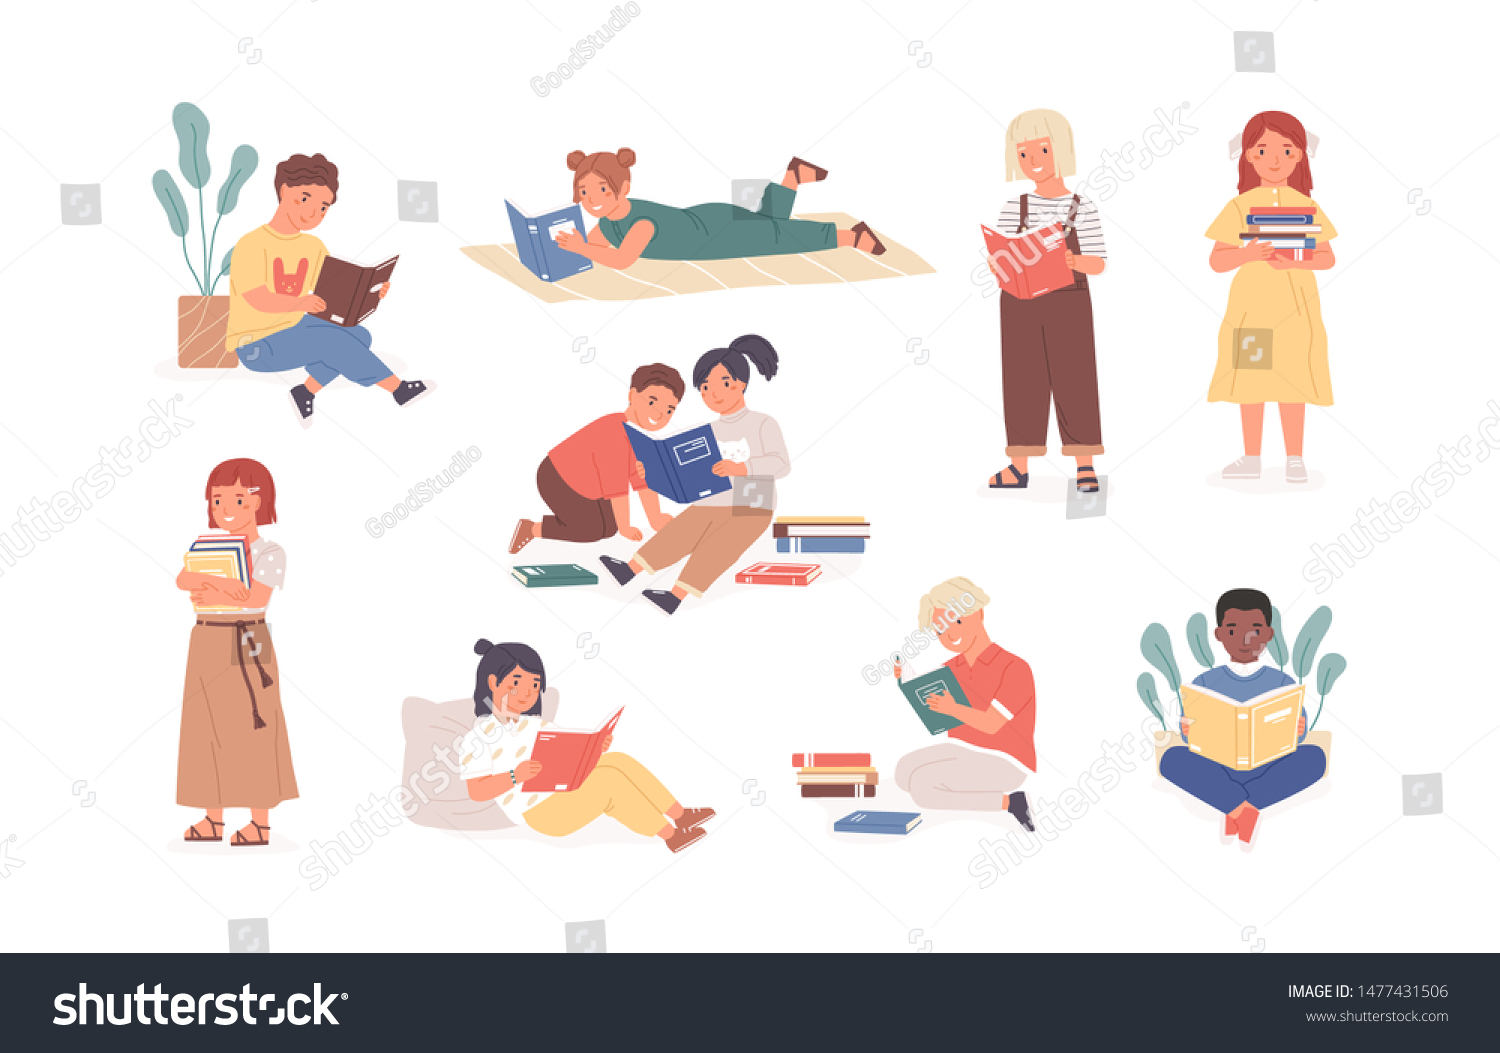 Bundle of reading children or studying kids. Collection of boys and girls with books, readers, young literature fans isolated on white background. Modern flat cartoon colorful vector illustration. #1477431506